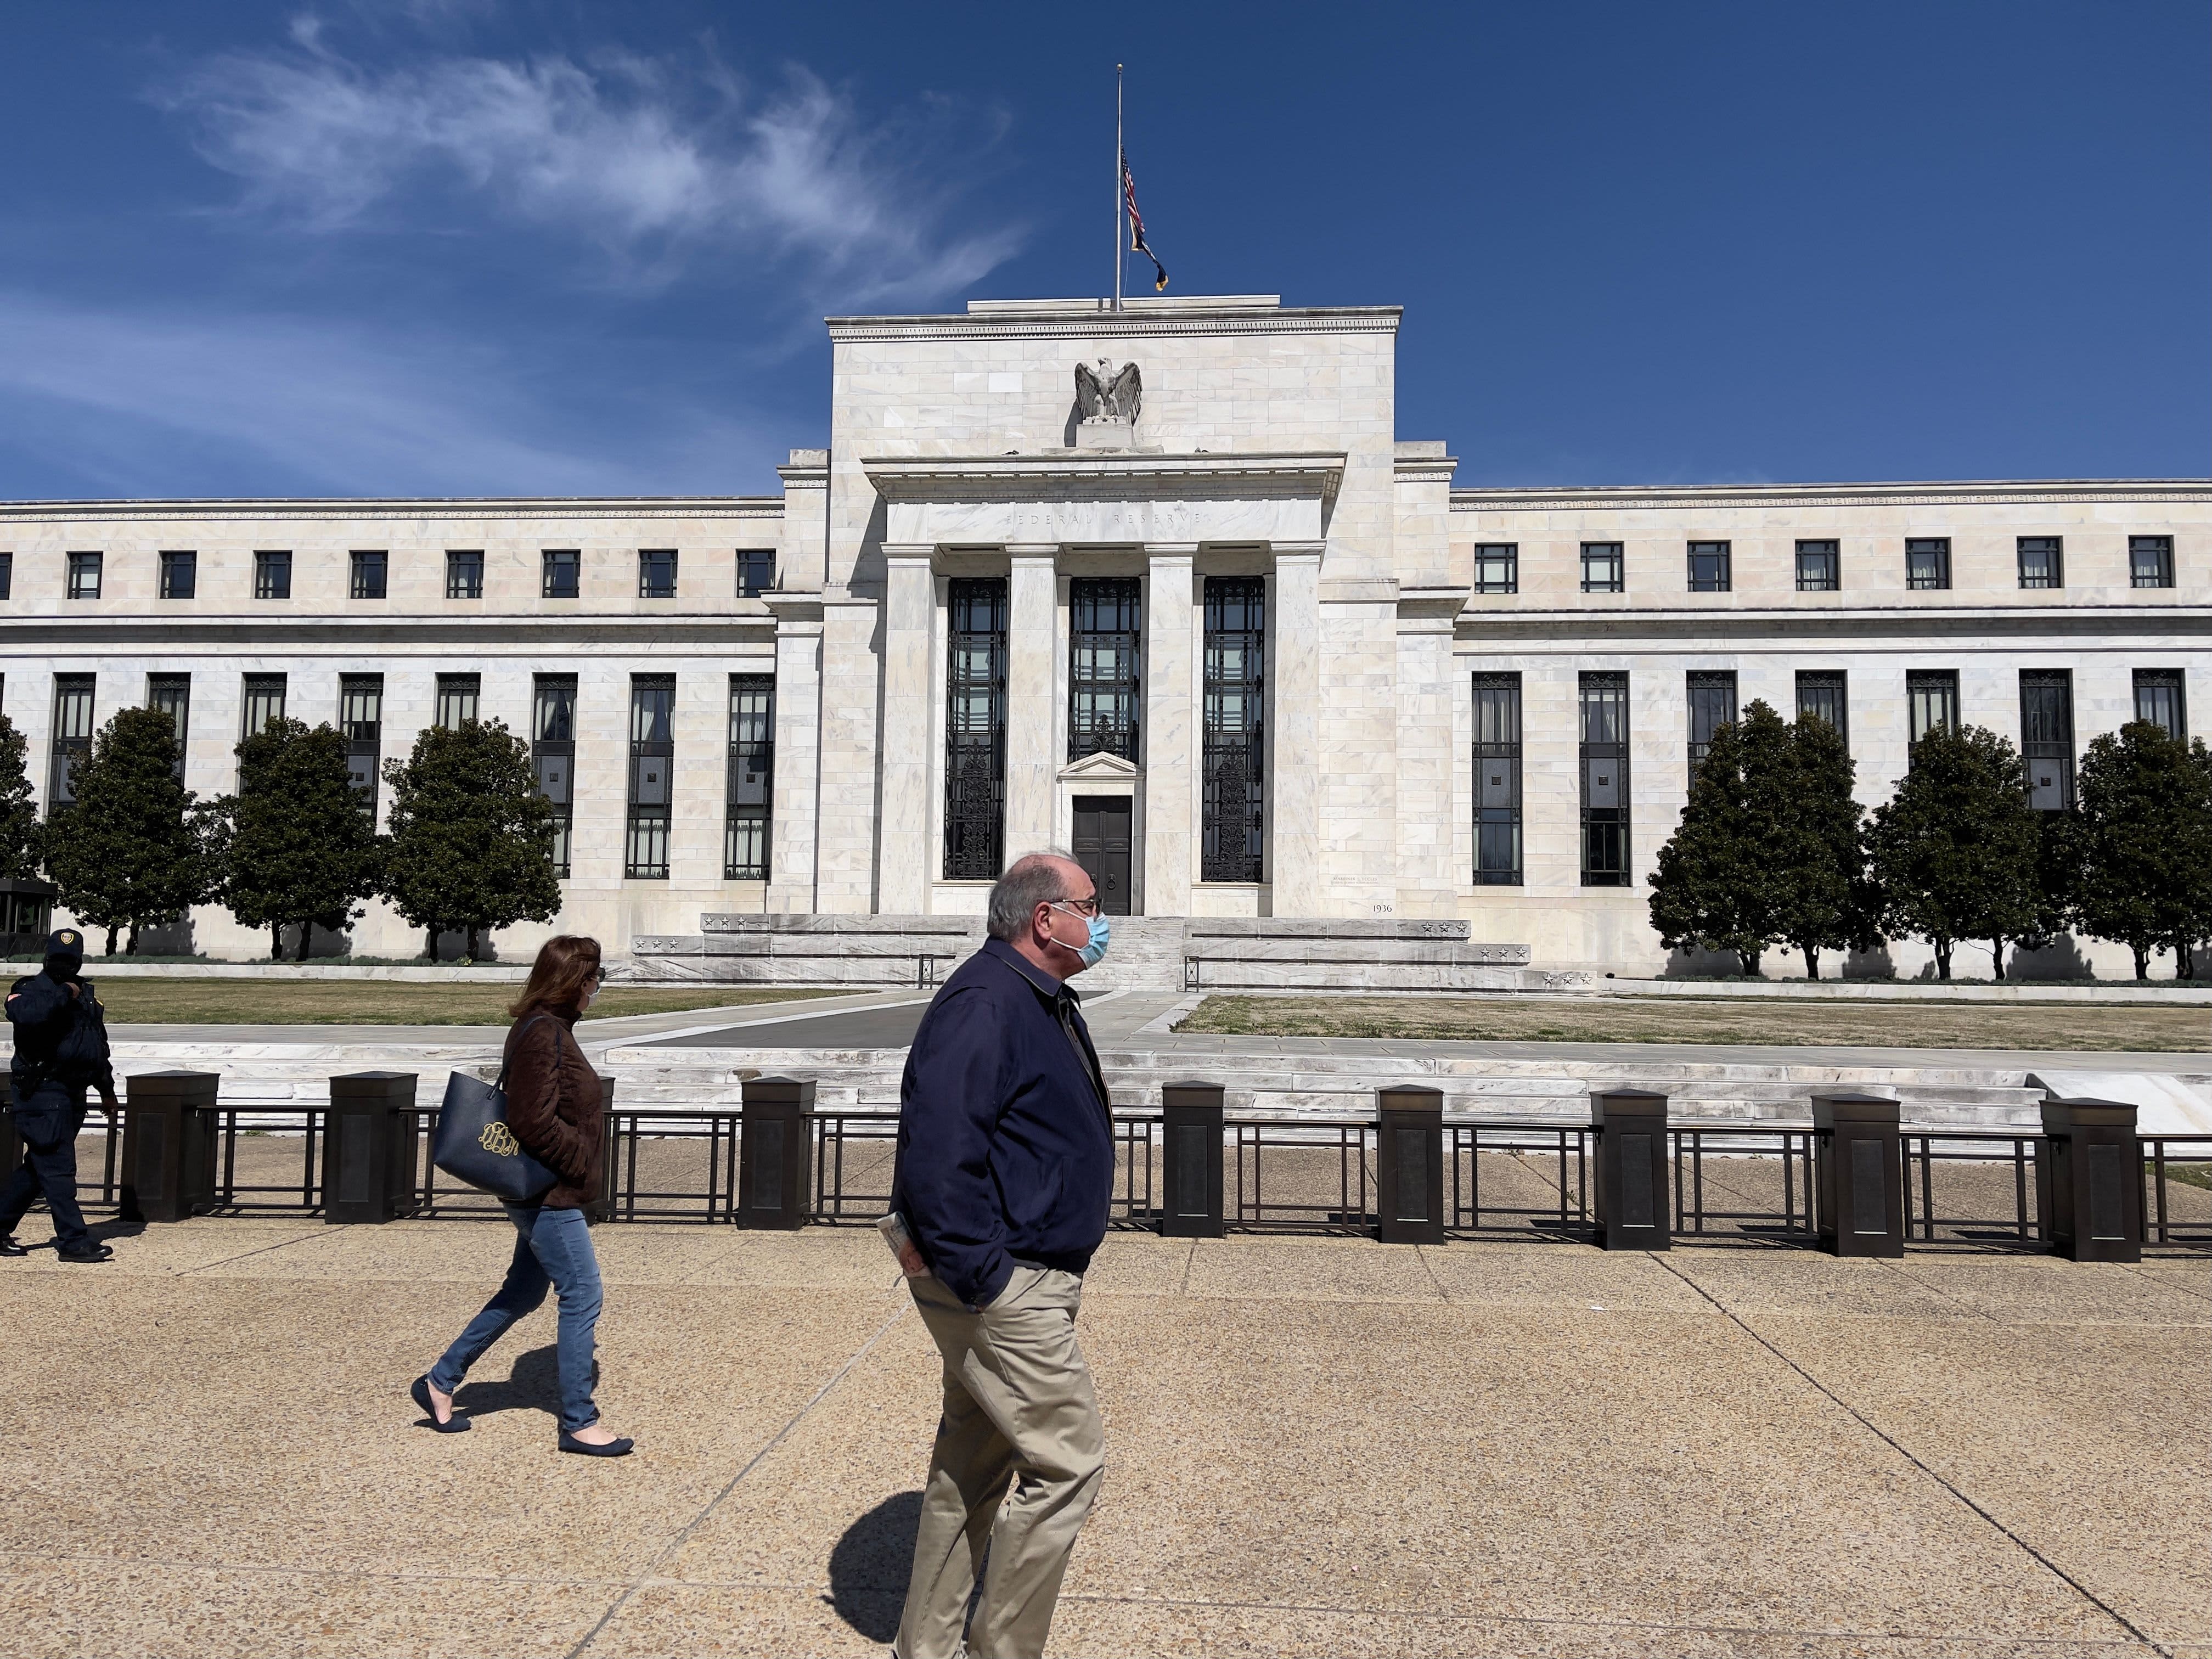 The March employment report provides the Fed’s coverage of monetary policy